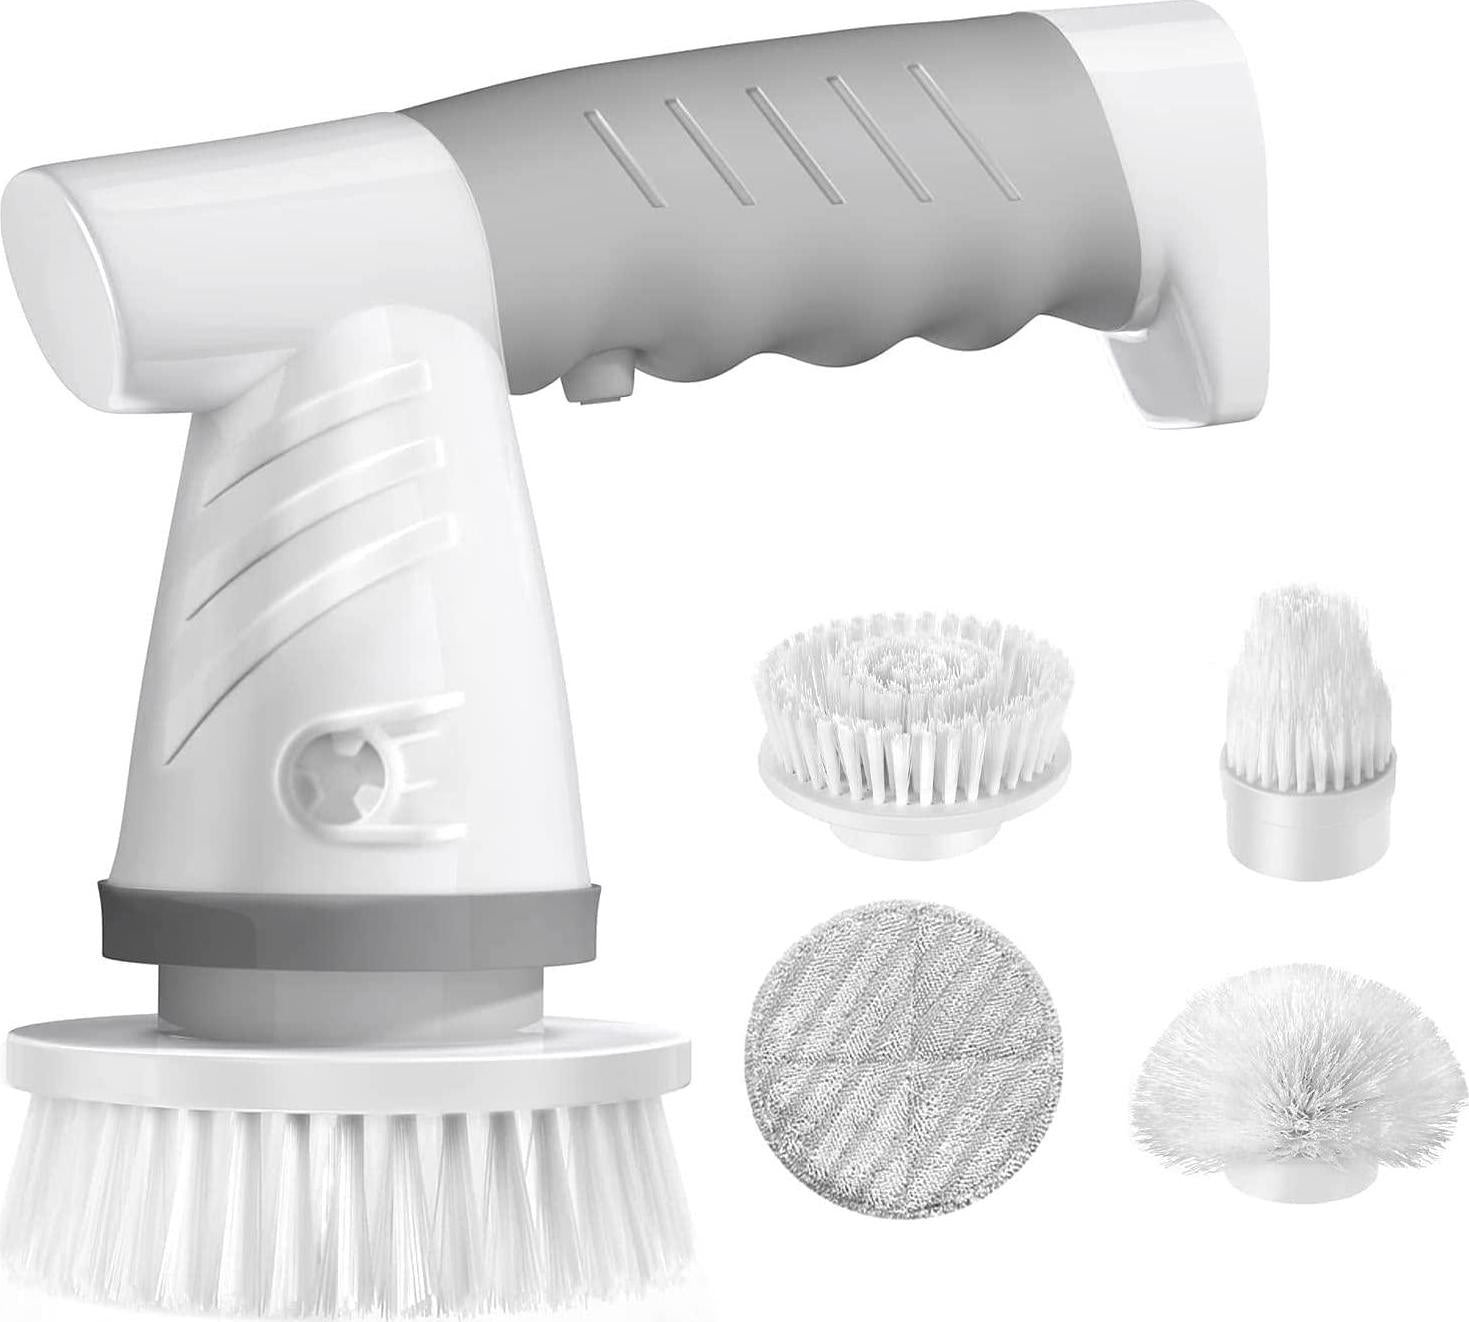 GRUTTI, GRUTTI Electric Spin Scrubber, Bathroom Scrubber Rechargeable Shower Scrubber for Cleaning Tub/Tile/Floor/Sink/Window Power Scrubber Cordless with 4 Replaceable Cleaning Brush Heads